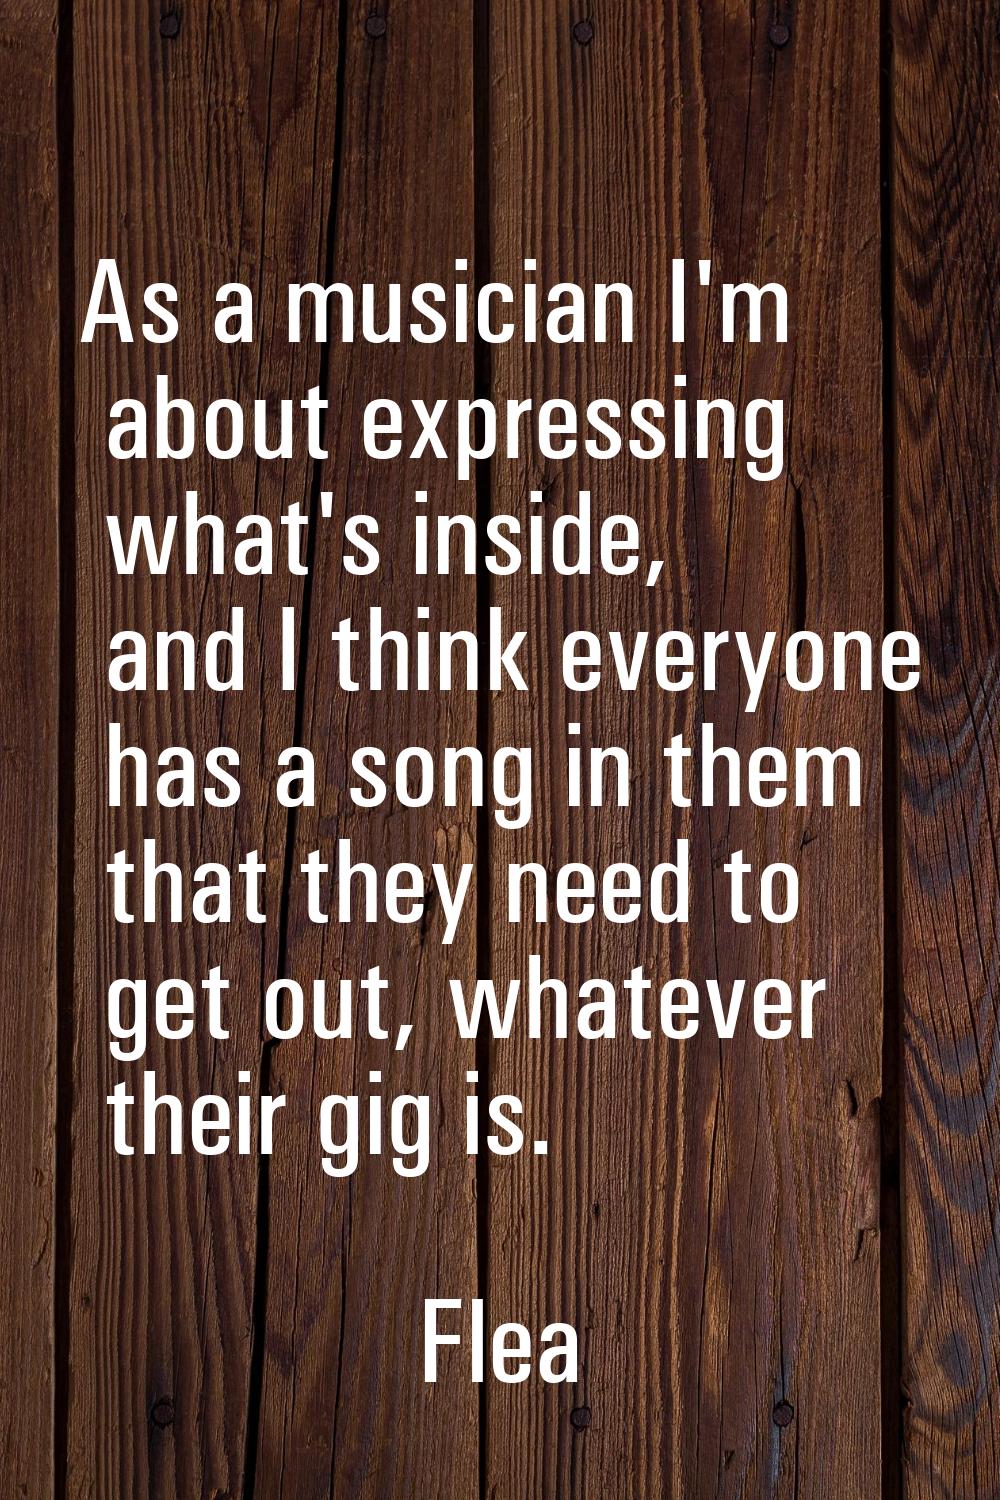 As a musician I'm about expressing what's inside, and I think everyone has a song in them that they